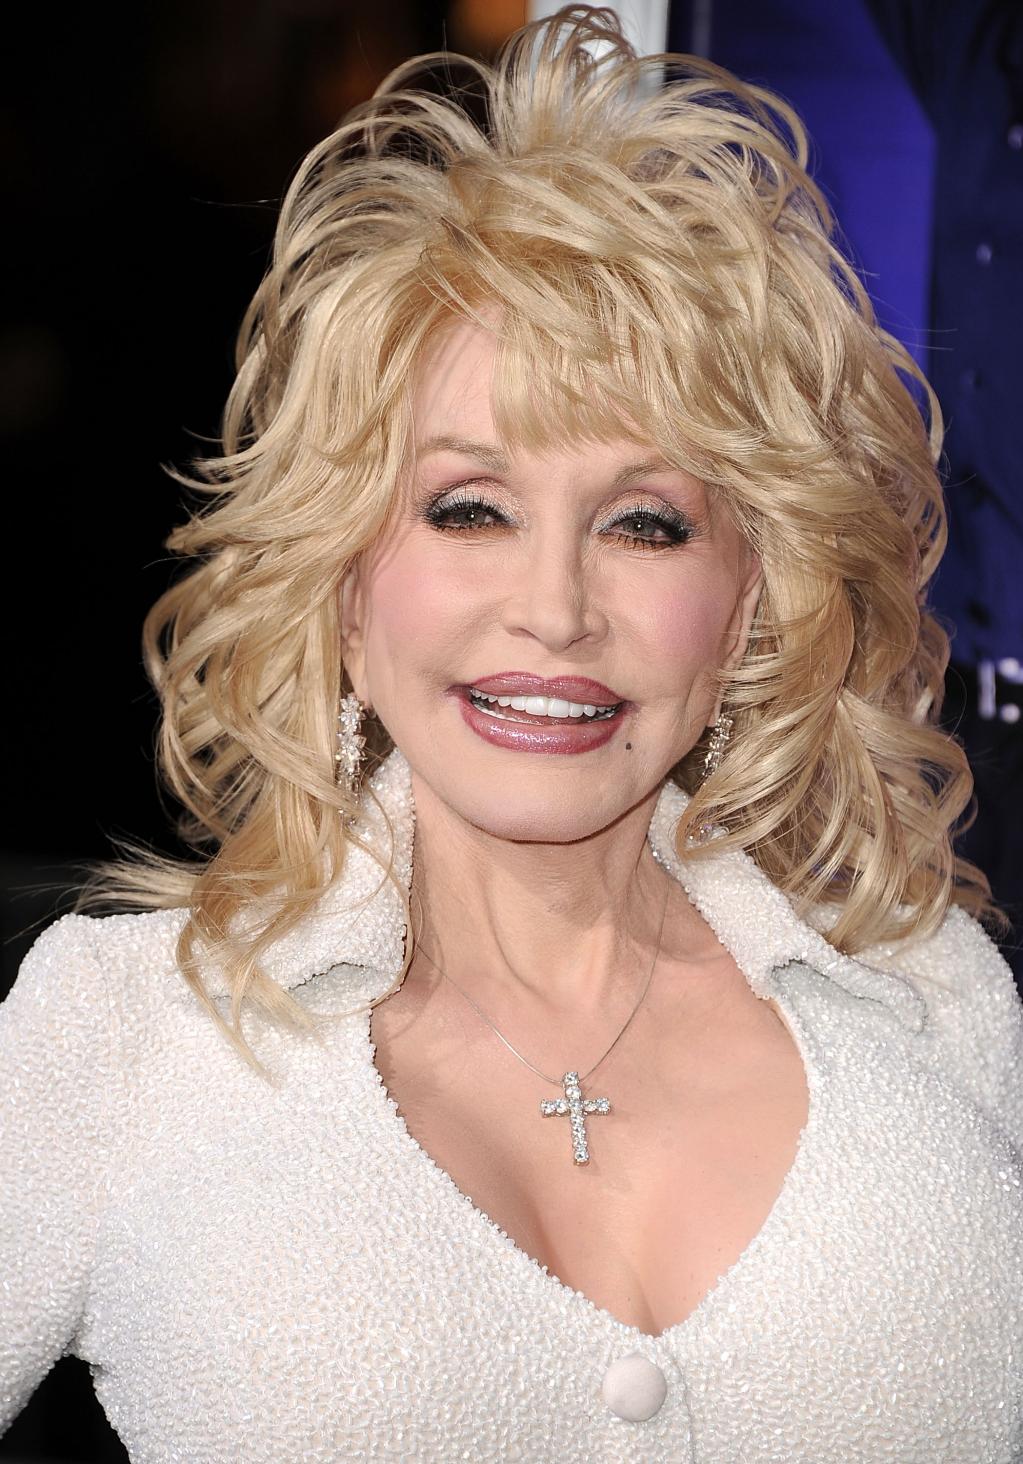 Dolly Parton Opens Up About The Crisis That Almost Ended Her